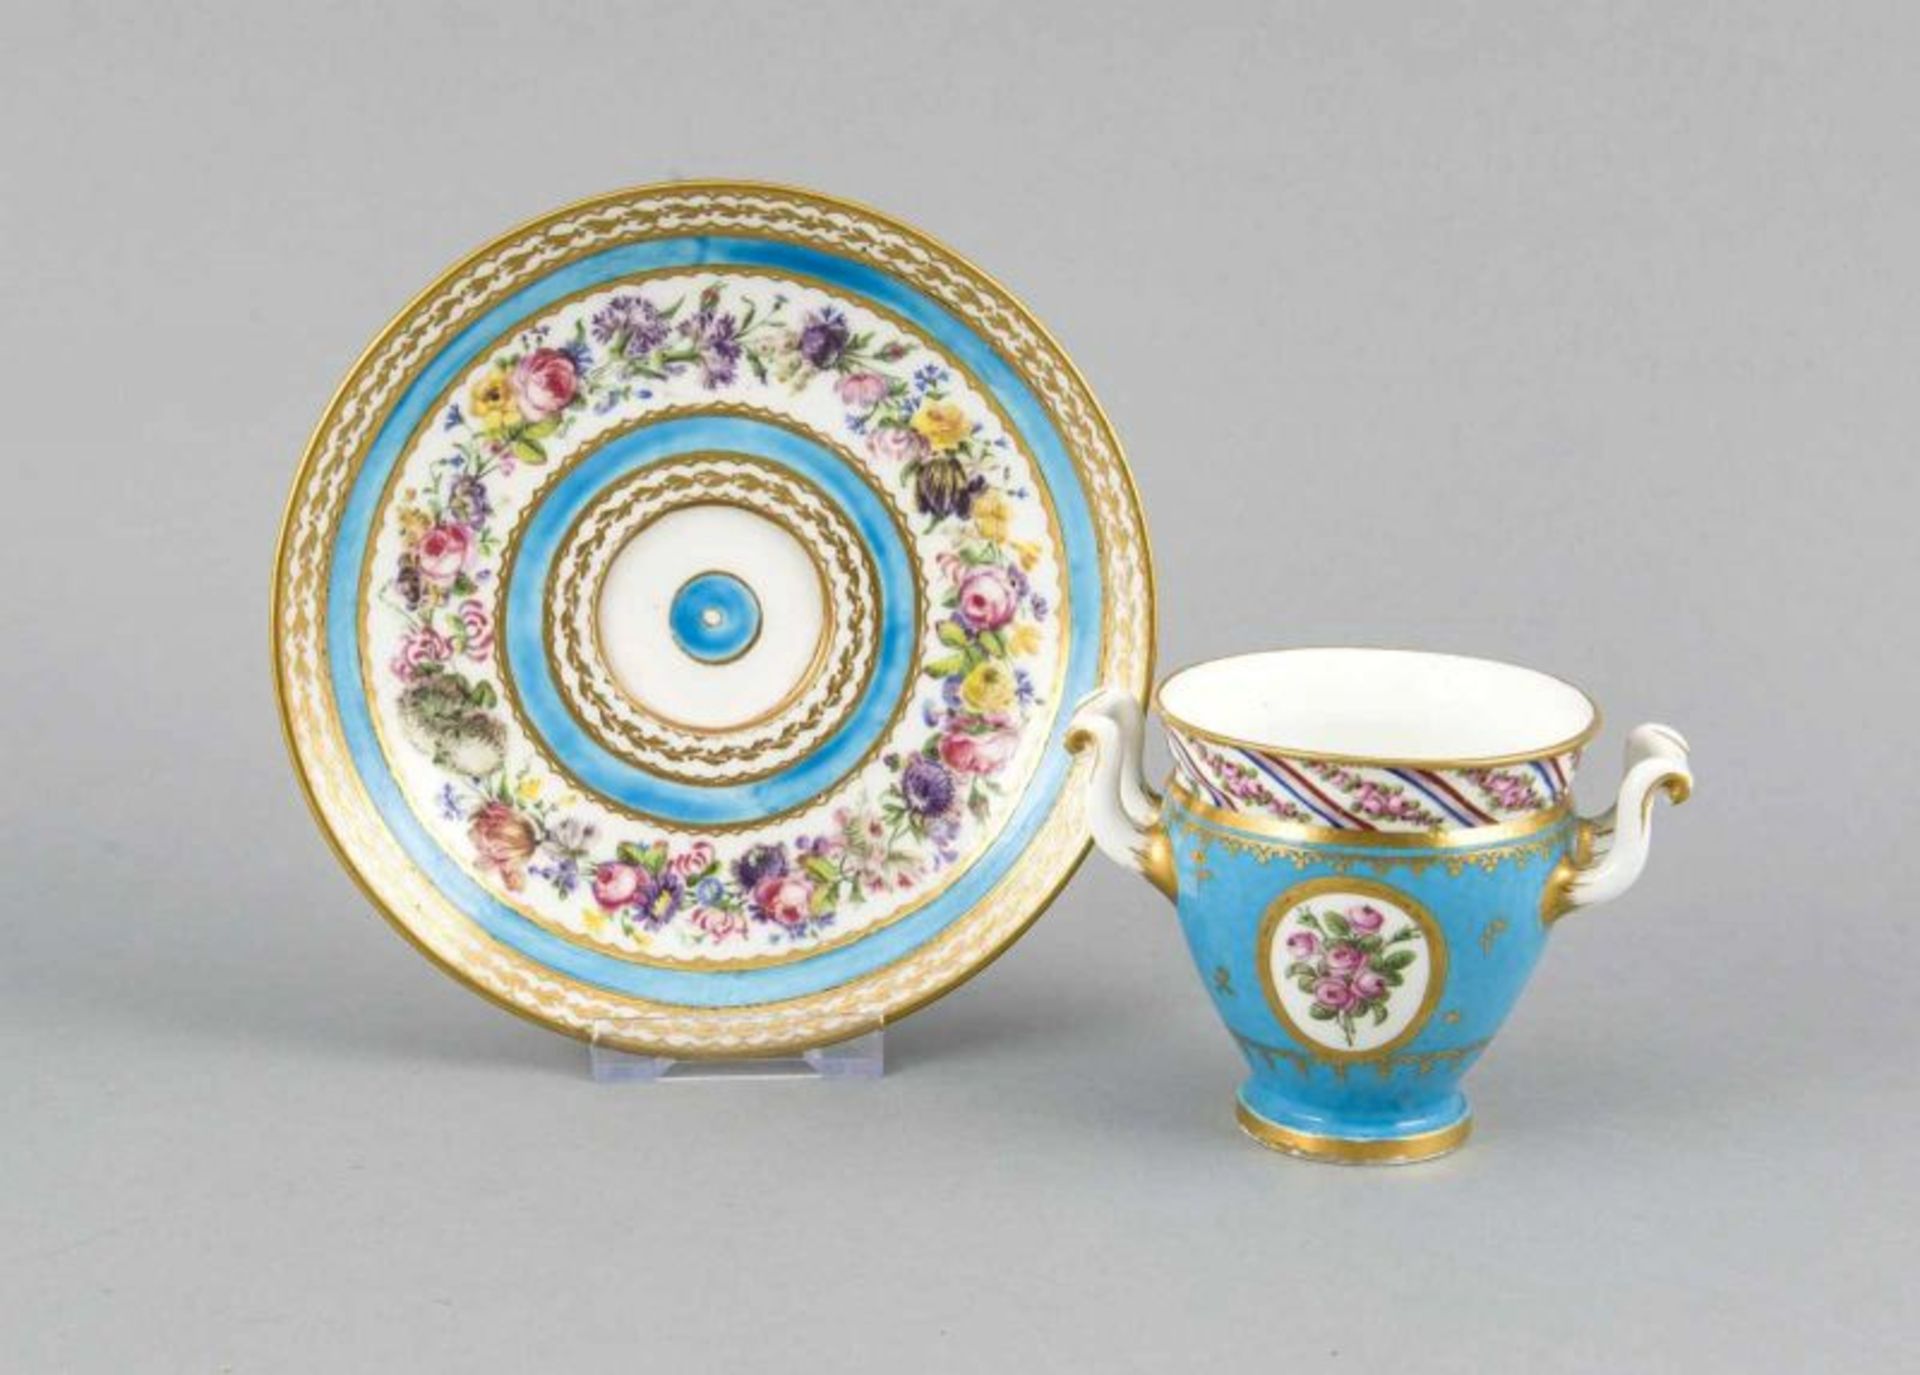 French 19th Century Sevres cup and saucer with floral and gold livery. Sevres, NN, DT. Dim. 10x16 cm